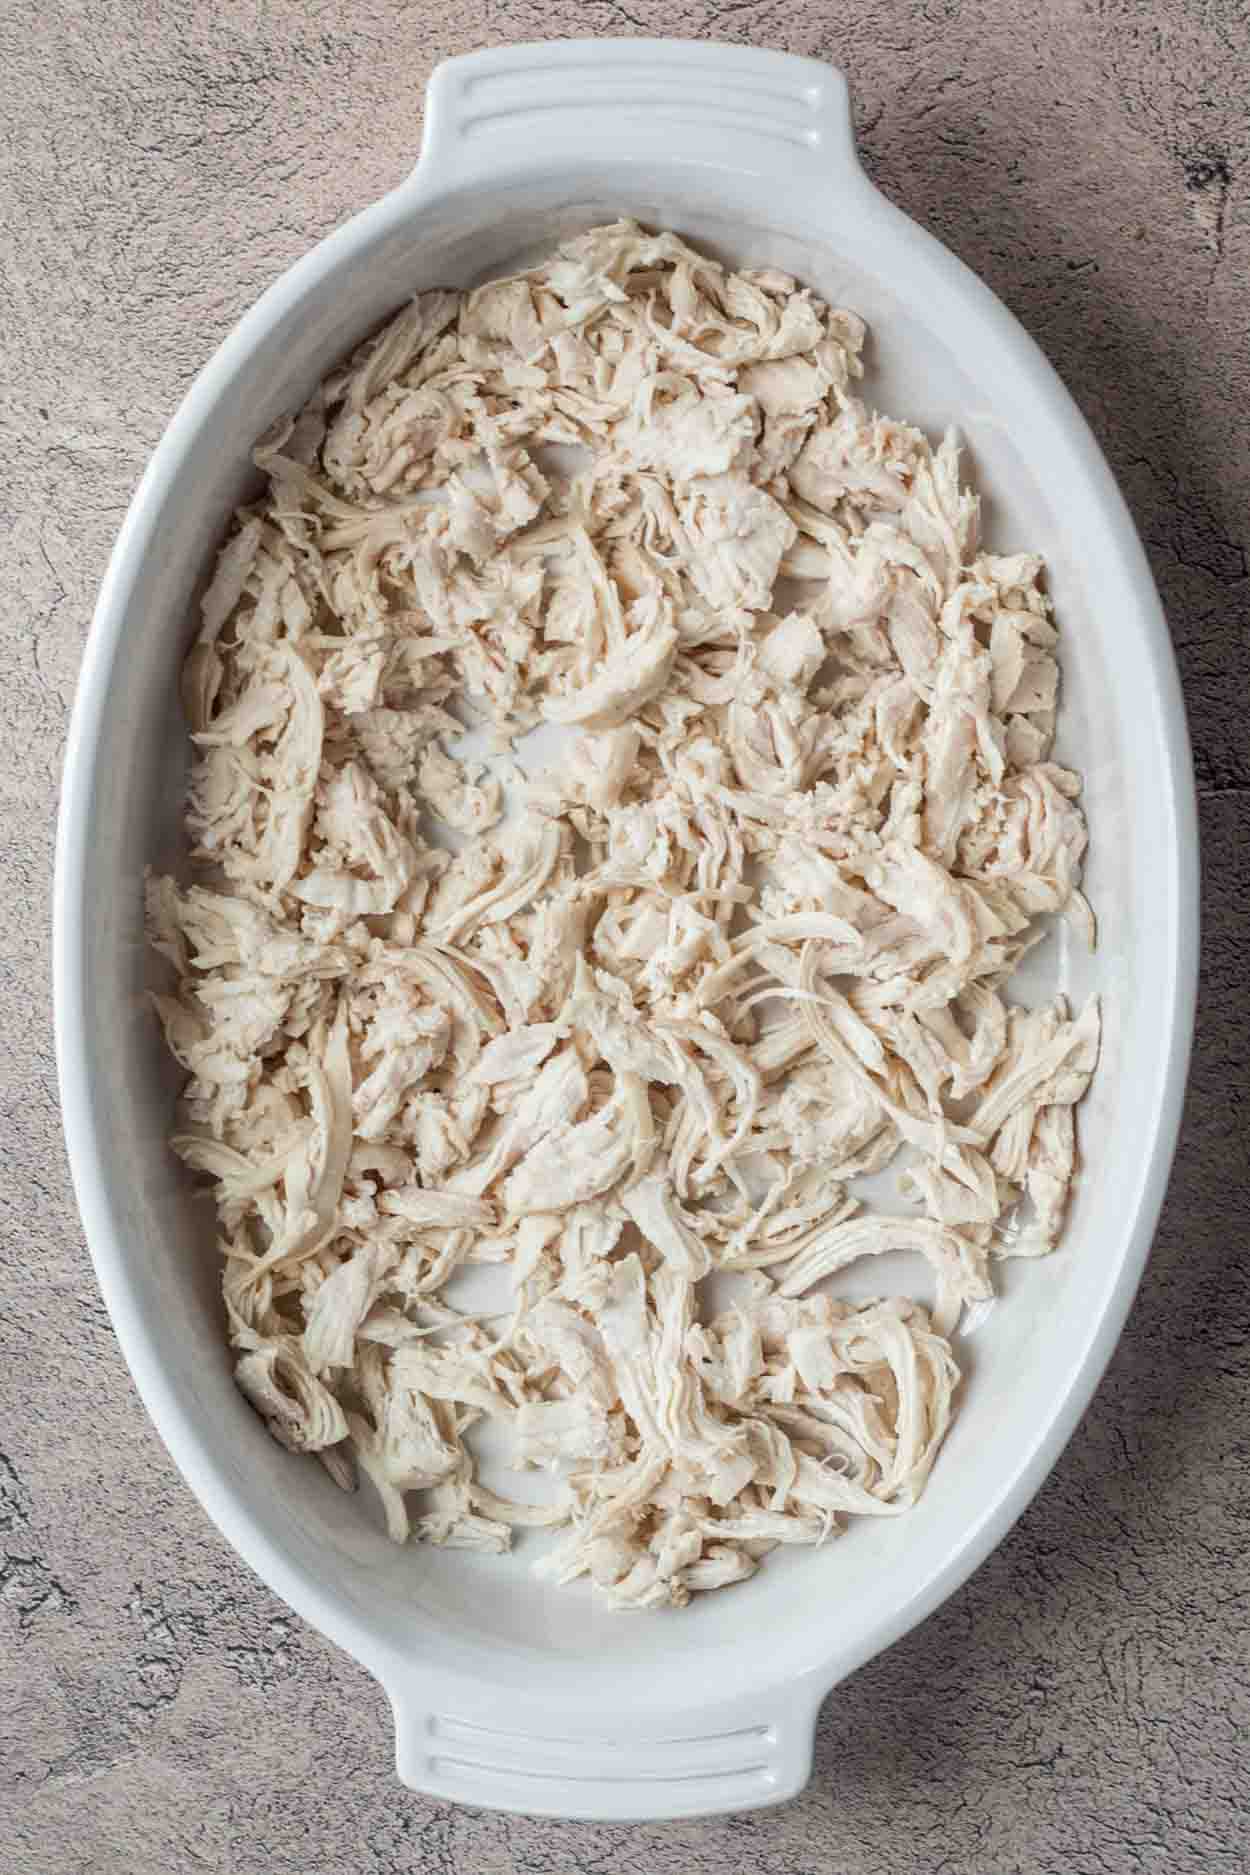 A casserole dish with shredded chicken evenly distributed.